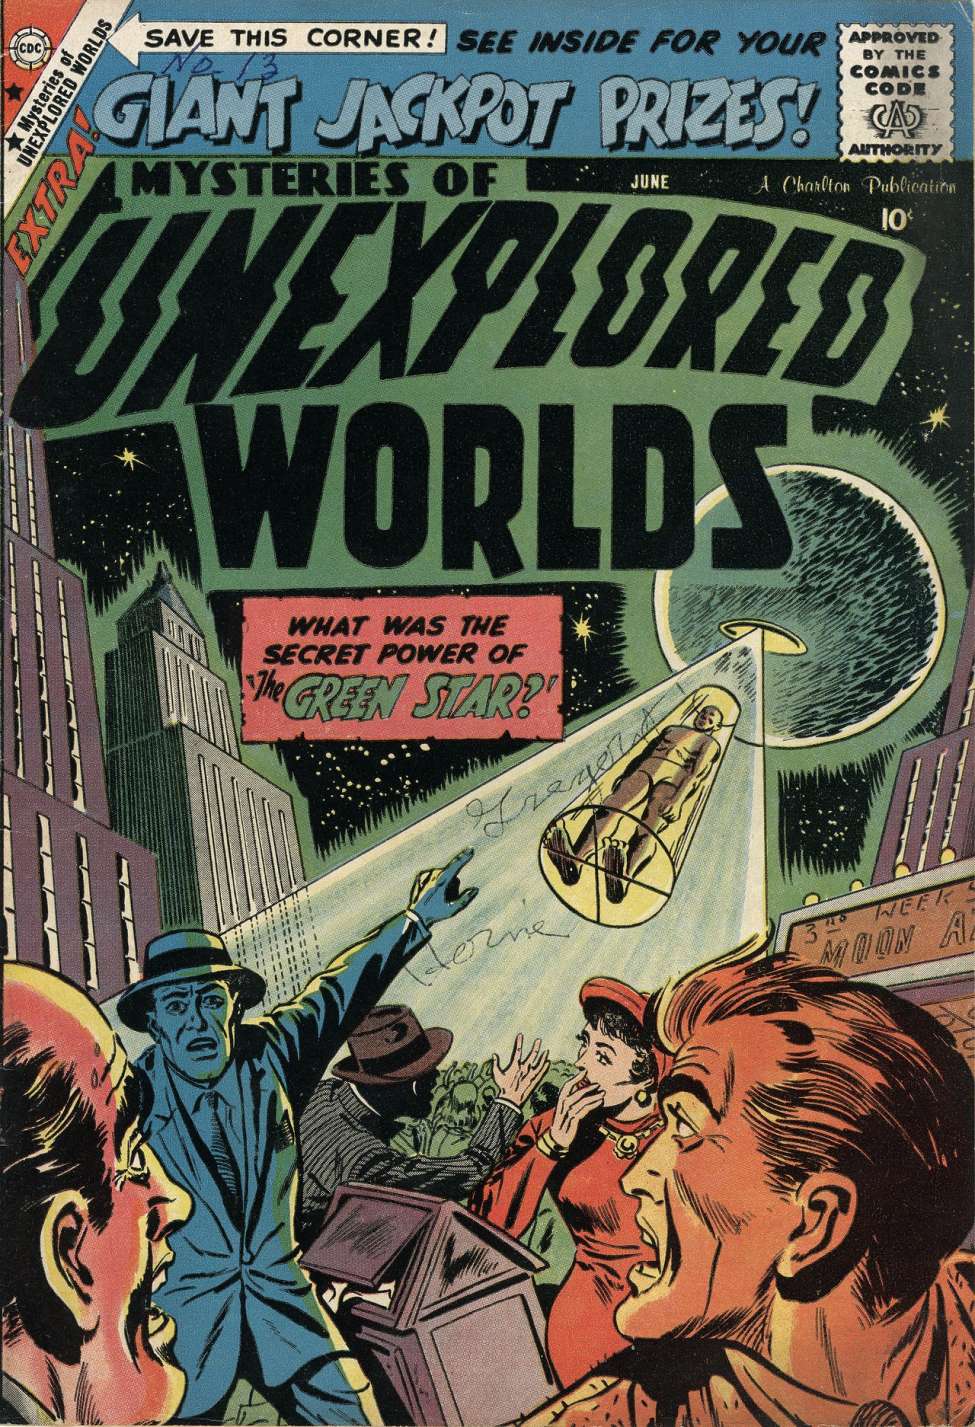 Book Cover For Mysteries of Unexplored Worlds 13